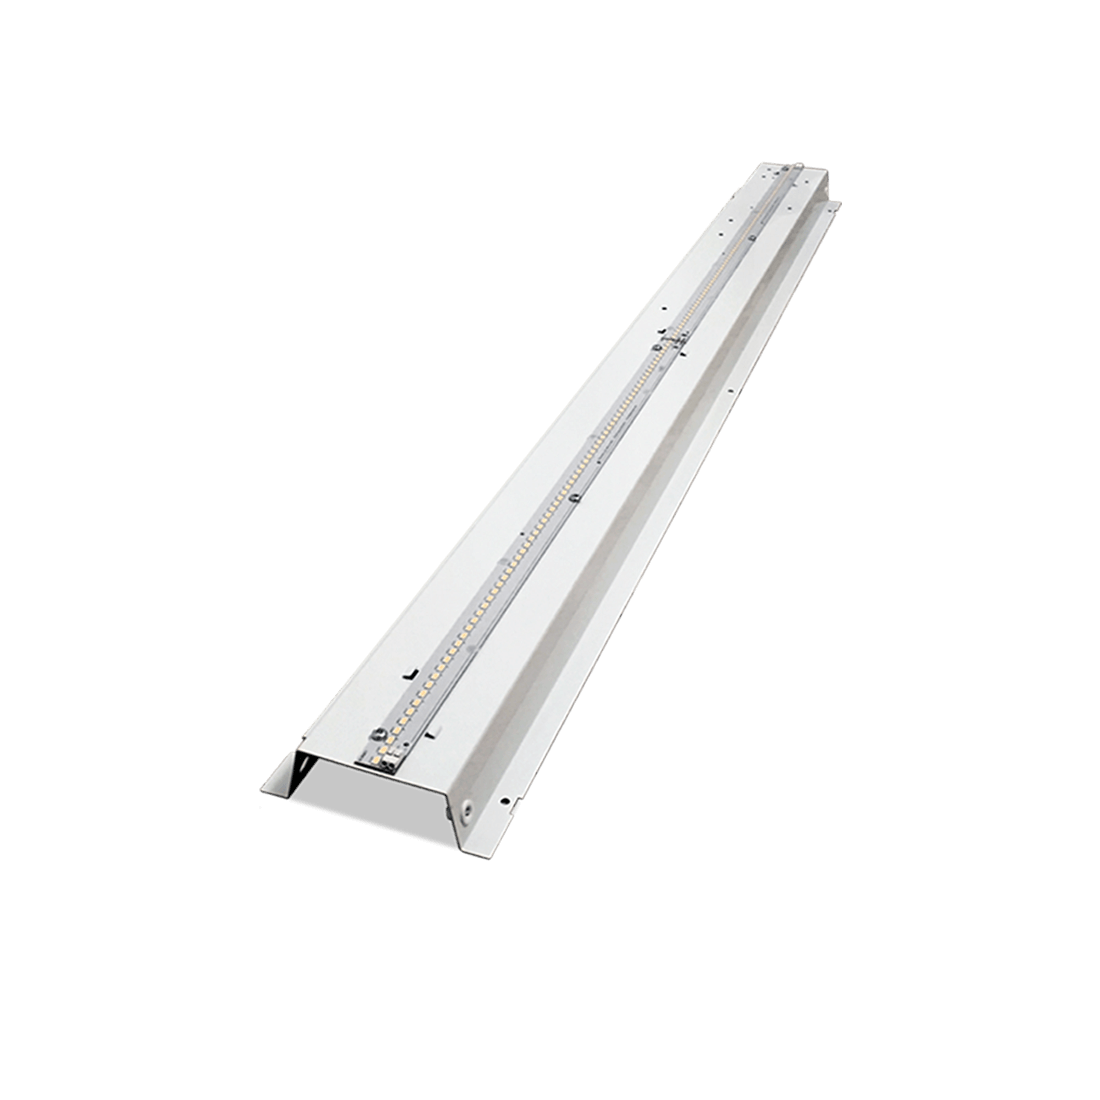 1x4 LED troffer retrofit style fixture with exposed LED boards